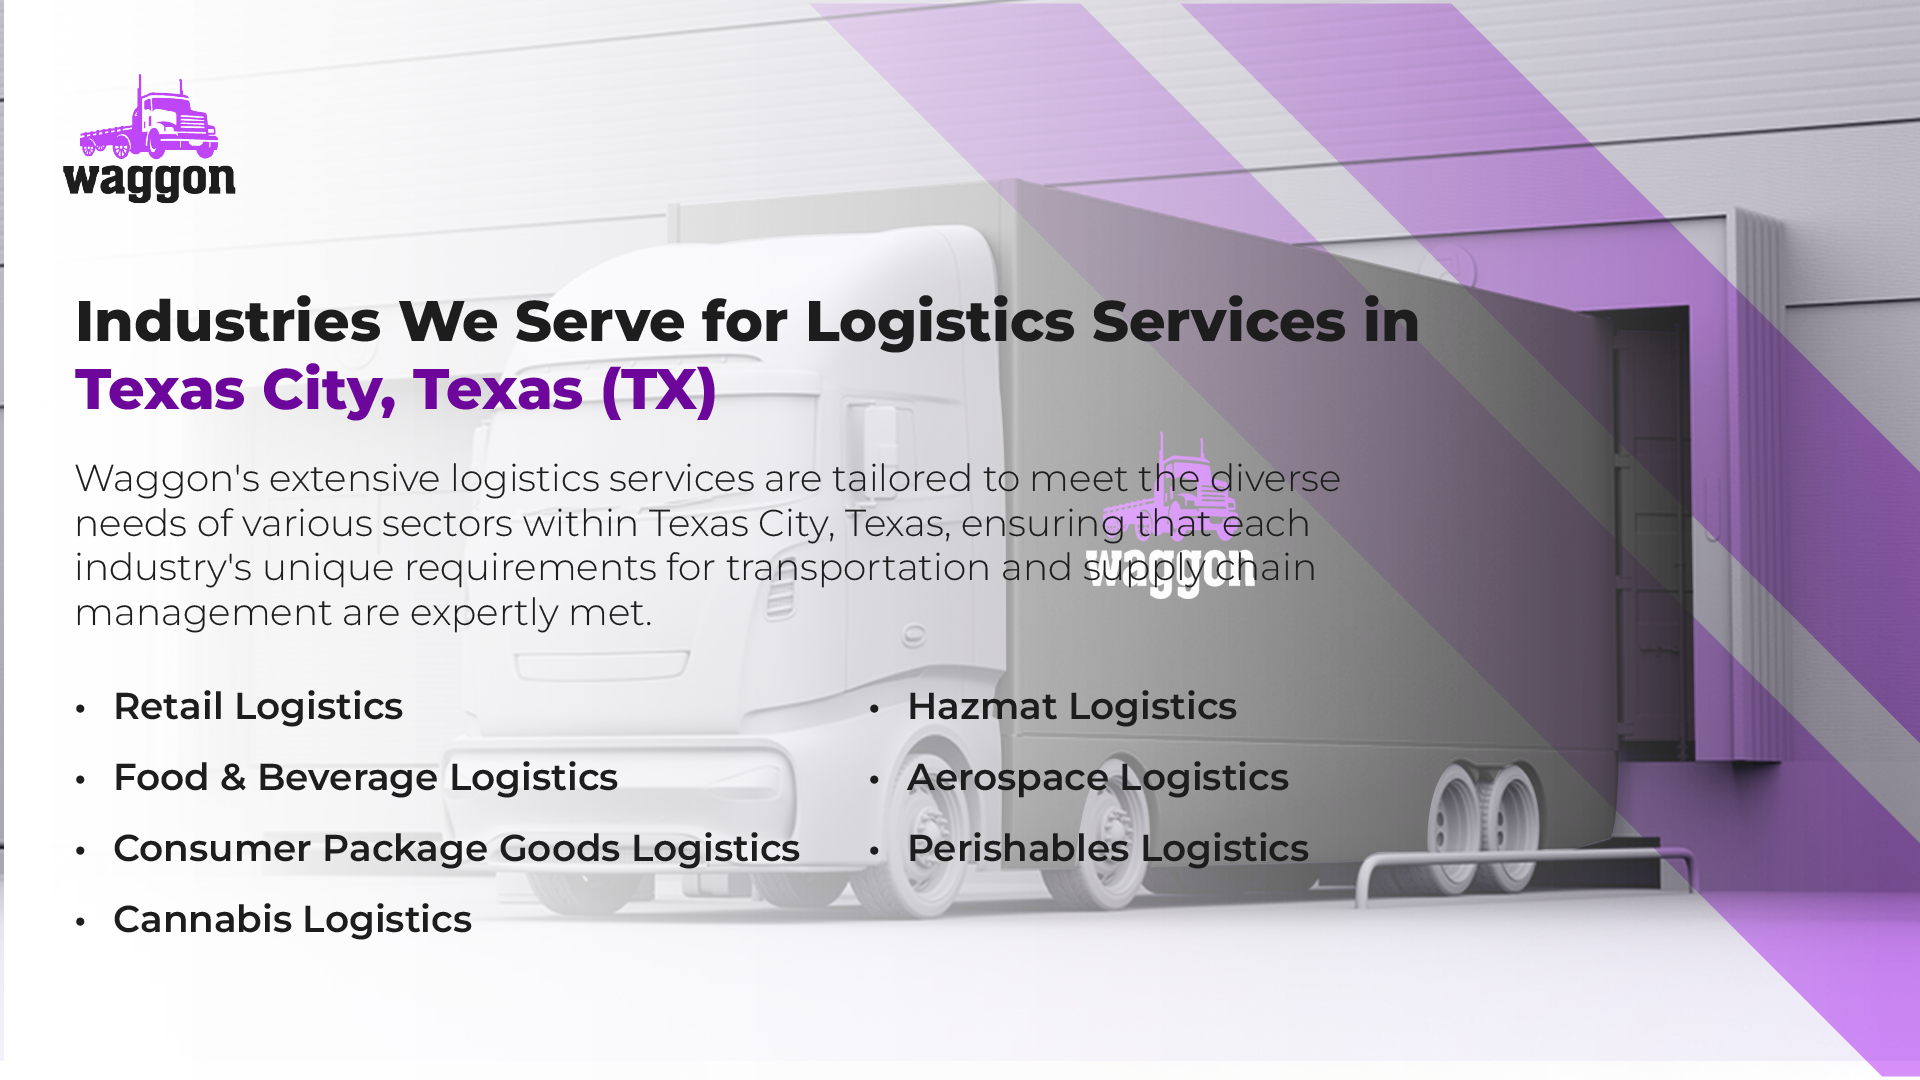 Industries We Serve for Logistics Services in Texas City, Texas (TX)